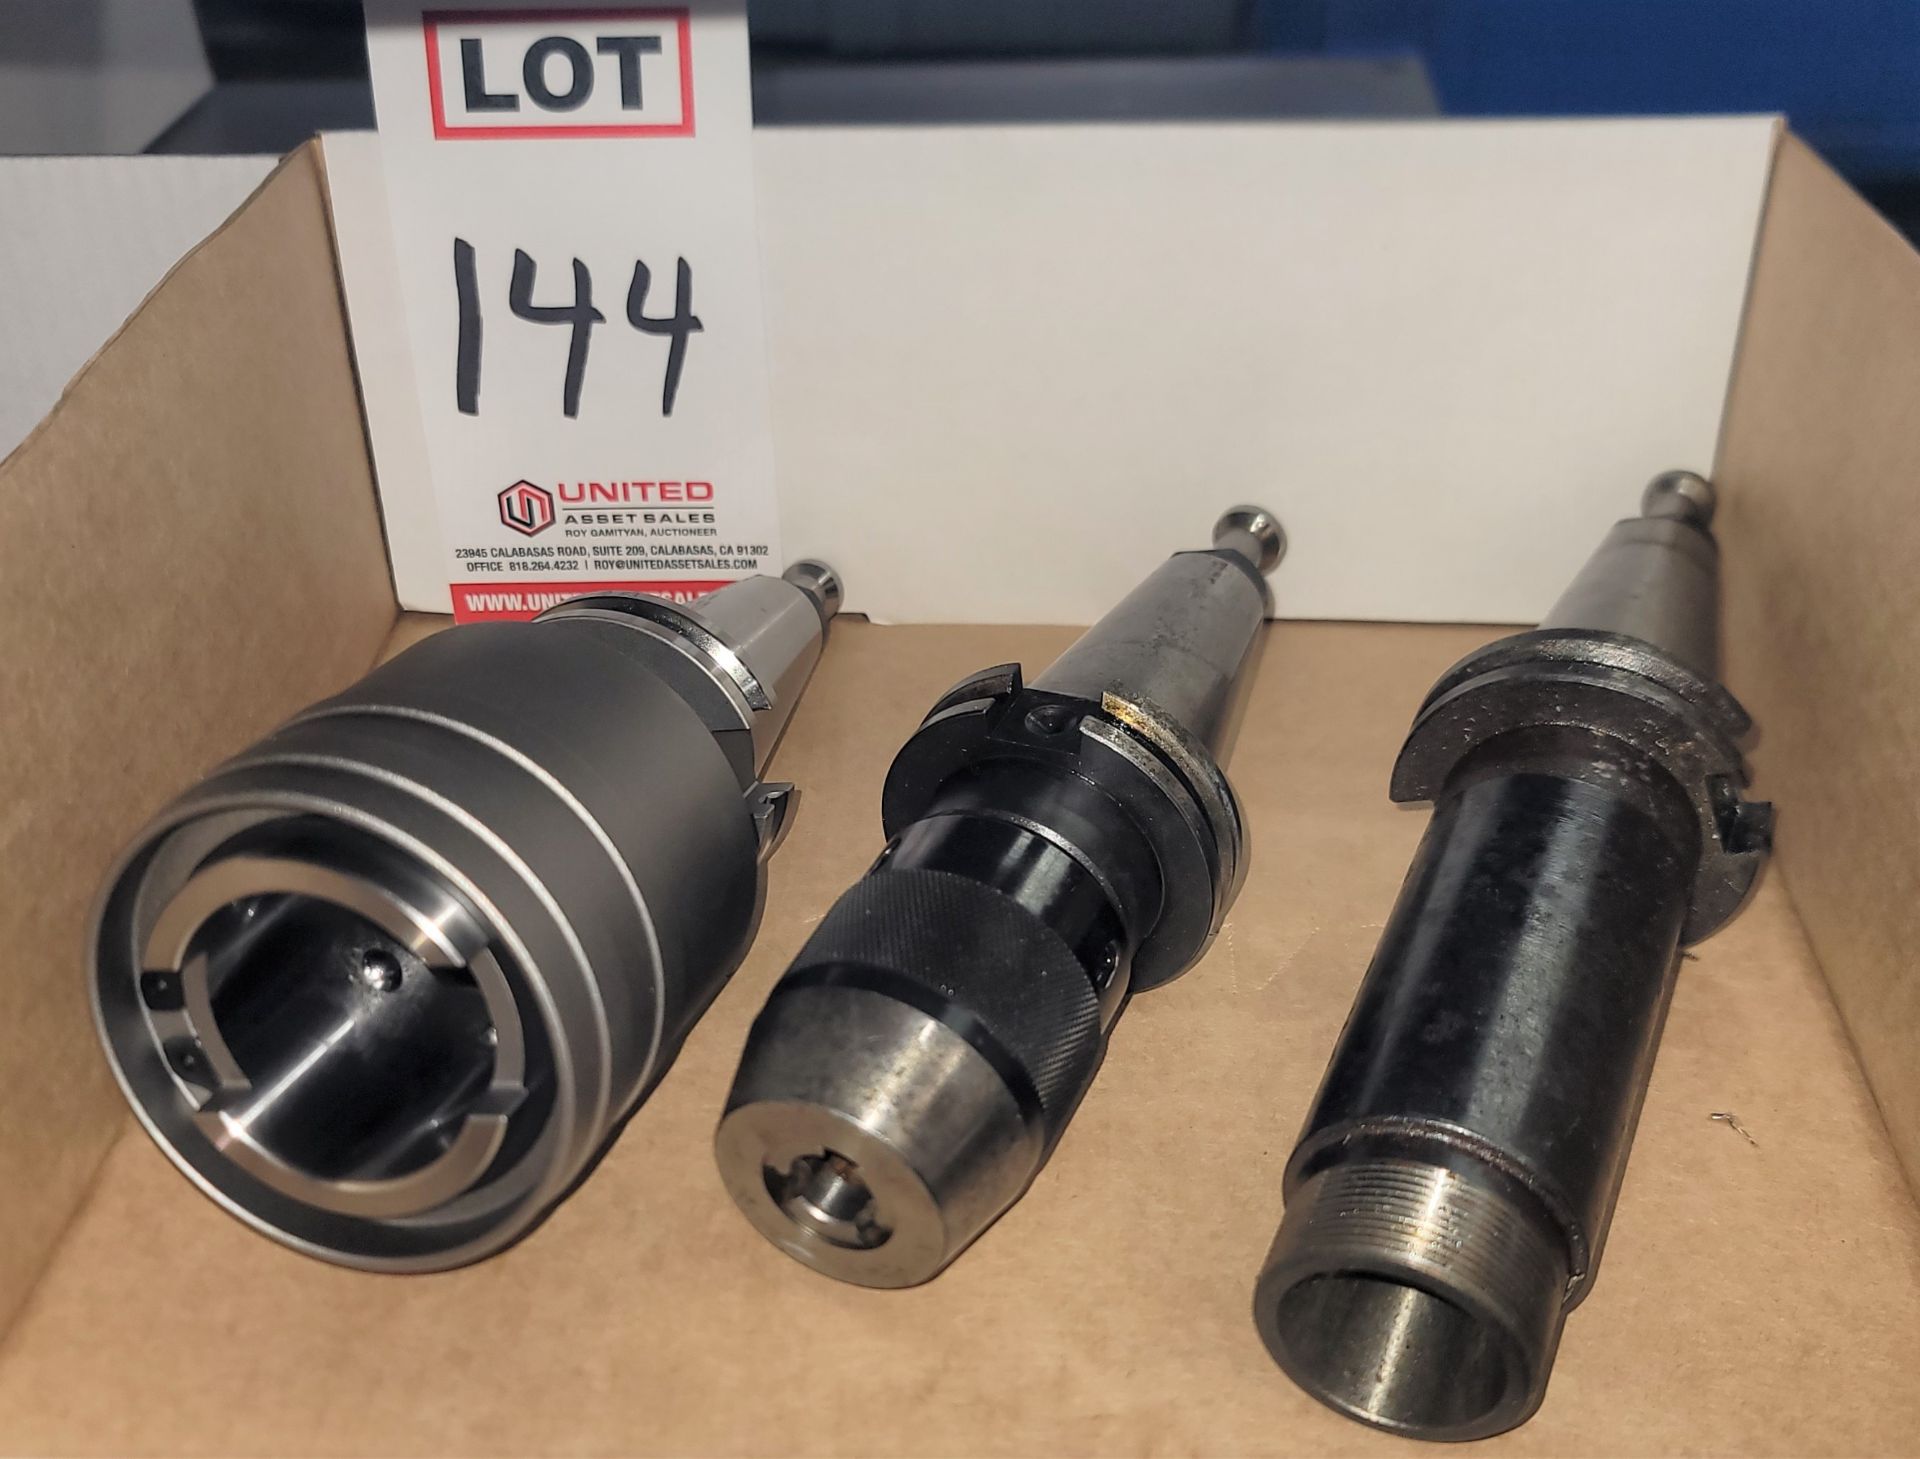 LOT - (1) CAT 40 LARGE TAPPING HOLDER, (1) CAT 40 SPEED CHUCK, (1) CAT 40 TOOL HOLDER